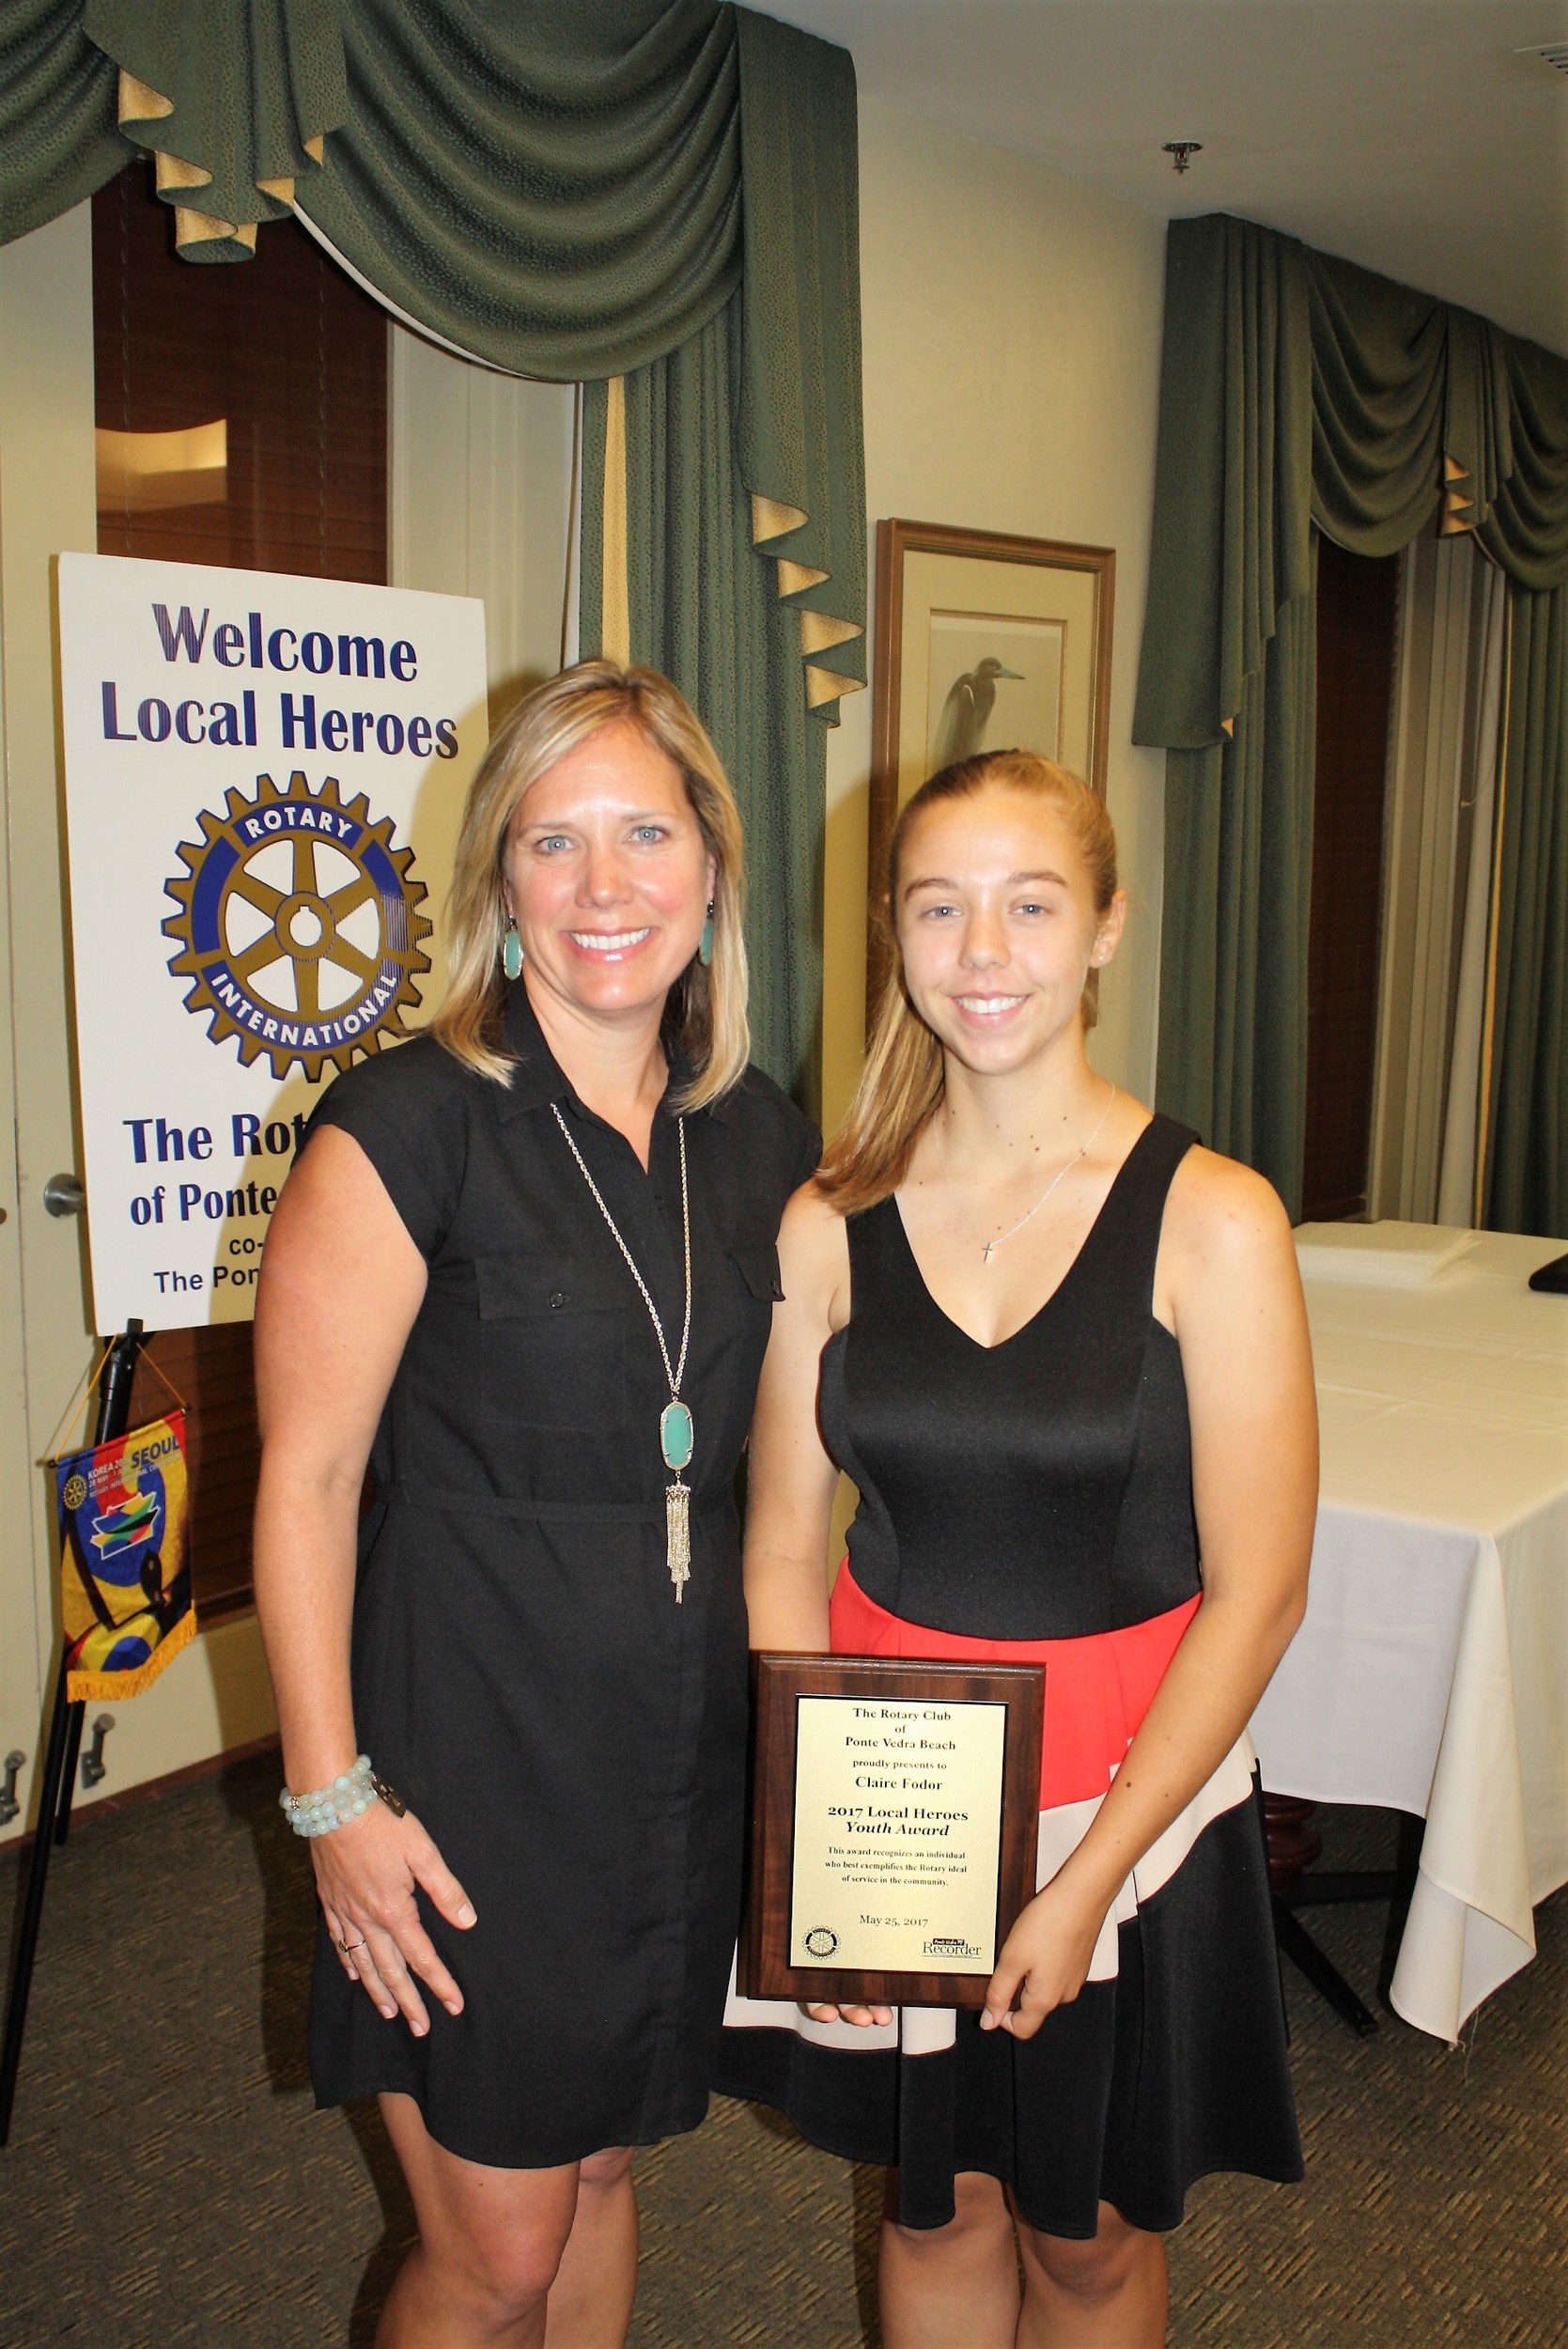 Ocean Palms Principal Jessica Richardson with Local Heroes Youth Award recipient Claire Fodor